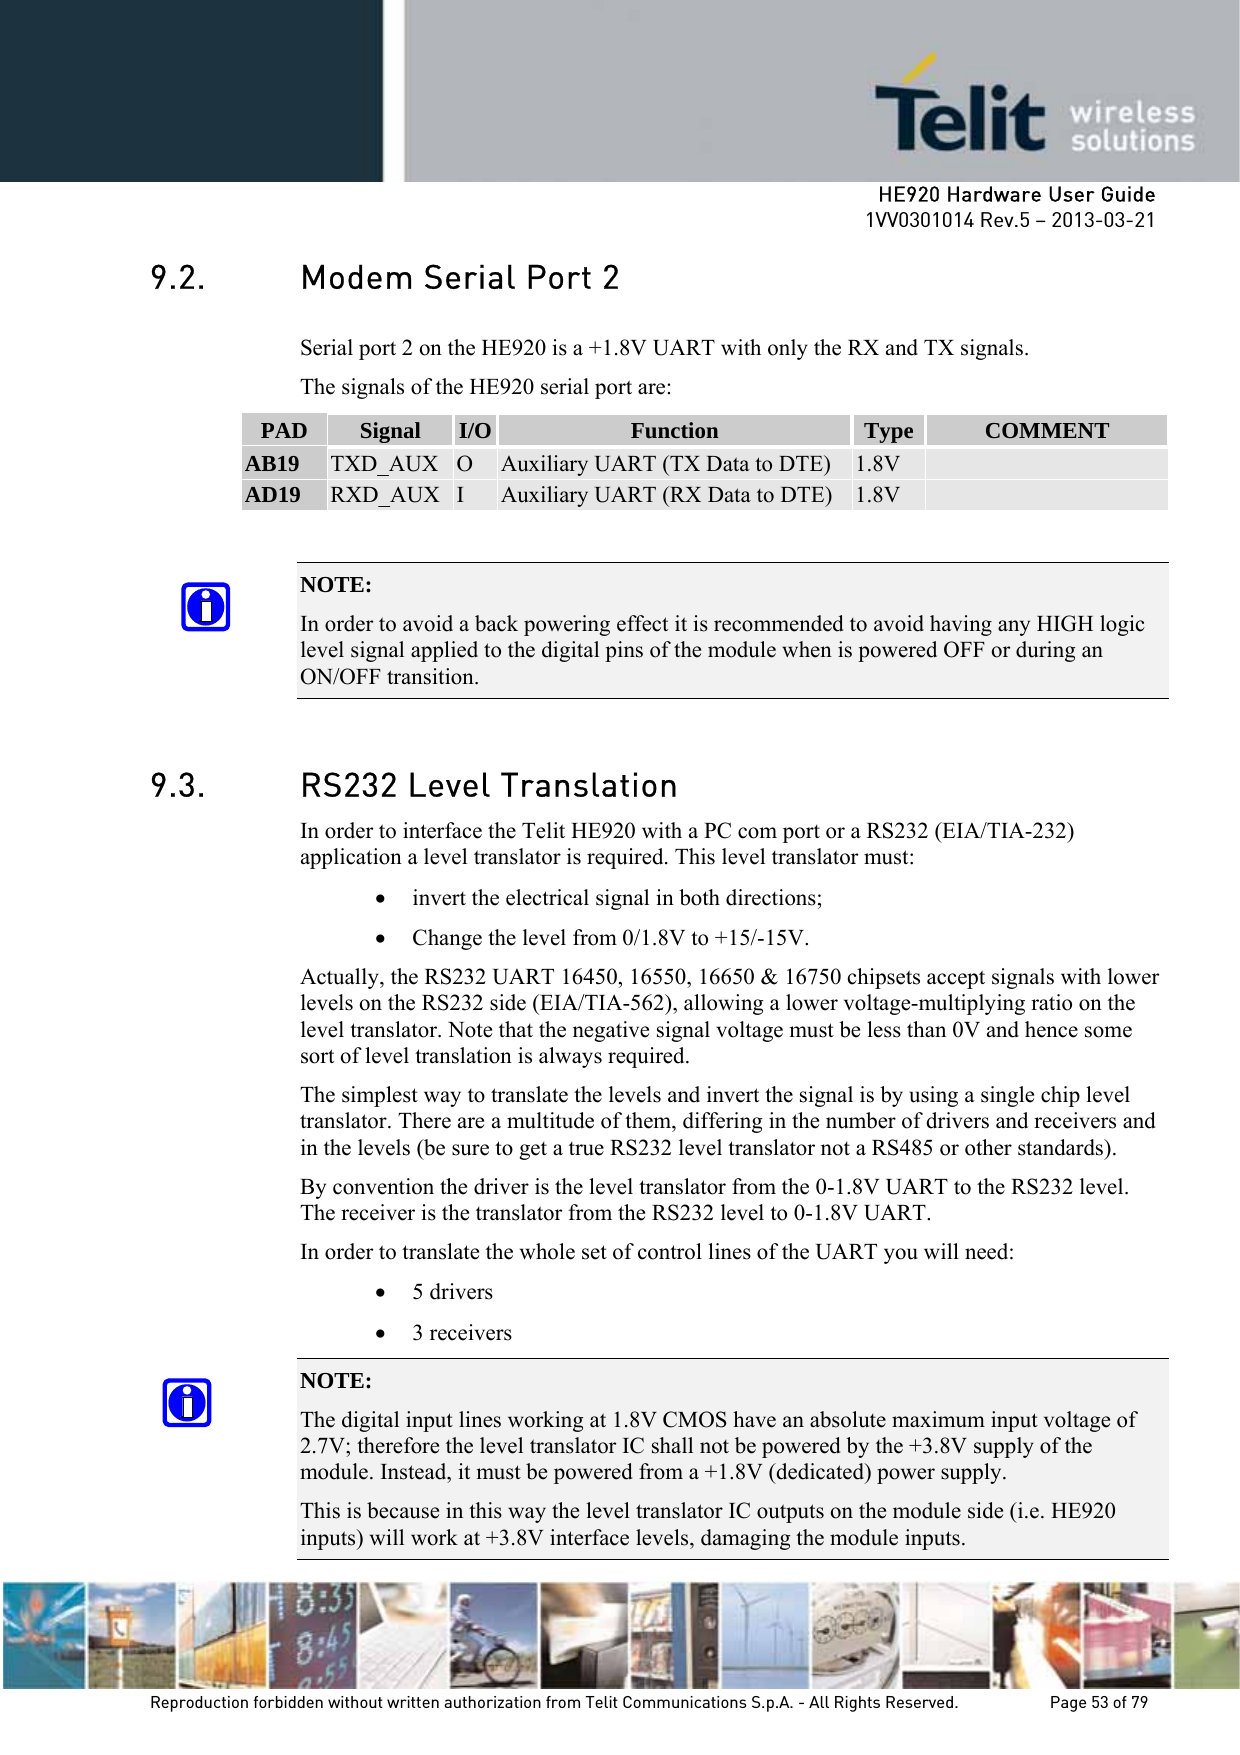     HE920 Hardware User Guide 1VV0301014 Rev.5 – 2013-03-21 Reproduction forbidden without written authorization from Telit Communications S.p.A. - All Rights Reserved.    Page 53 of 79  9.2. Modem Serial Port 2 Serial port 2 on the HE920 is a +1.8V UART with only the RX and TX signals.  The signals of the HE920 serial port are: PAD  Signal  I/O  Function  Type  COMMENT AB19  TXD_AUX  O  Auxiliary UART (TX Data to DTE)  1.8V   AD19  RXD_AUX  I  Auxiliary UART (RX Data to DTE)  1.8V    NOTE:  In order to avoid a back powering effect it is recommended to avoid having any HIGH logic level signal applied to the digital pins of the module when is powered OFF or during an ON/OFF transition.  9.3. RS232 Level Translation In order to interface the Telit HE920 with a PC com port or a RS232 (EIA/TIA-232) application a level translator is required. This level translator must: • invert the electrical signal in both directions; • Change the level from 0/1.8V to +15/-15V. Actually, the RS232 UART 16450, 16550, 16650 &amp; 16750 chipsets accept signals with lower levels on the RS232 side (EIA/TIA-562), allowing a lower voltage-multiplying ratio on the level translator. Note that the negative signal voltage must be less than 0V and hence some sort of level translation is always required.  The simplest way to translate the levels and invert the signal is by using a single chip level translator. There are a multitude of them, differing in the number of drivers and receivers and in the levels (be sure to get a true RS232 level translator not a RS485 or other standards). By convention the driver is the level translator from the 0-1.8V UART to the RS232 level. The receiver is the translator from the RS232 level to 0-1.8V UART. In order to translate the whole set of control lines of the UART you will need: • 5 drivers • 3 receivers NOTE:  The digital input lines working at 1.8V CMOS have an absolute maximum input voltage of 2.7V; therefore the level translator IC shall not be powered by the +3.8V supply of the module. Instead, it must be powered from a +1.8V (dedicated) power supply. This is because in this way the level translator IC outputs on the module side (i.e. HE920 inputs) will work at +3.8V interface levels, damaging the module inputs. 